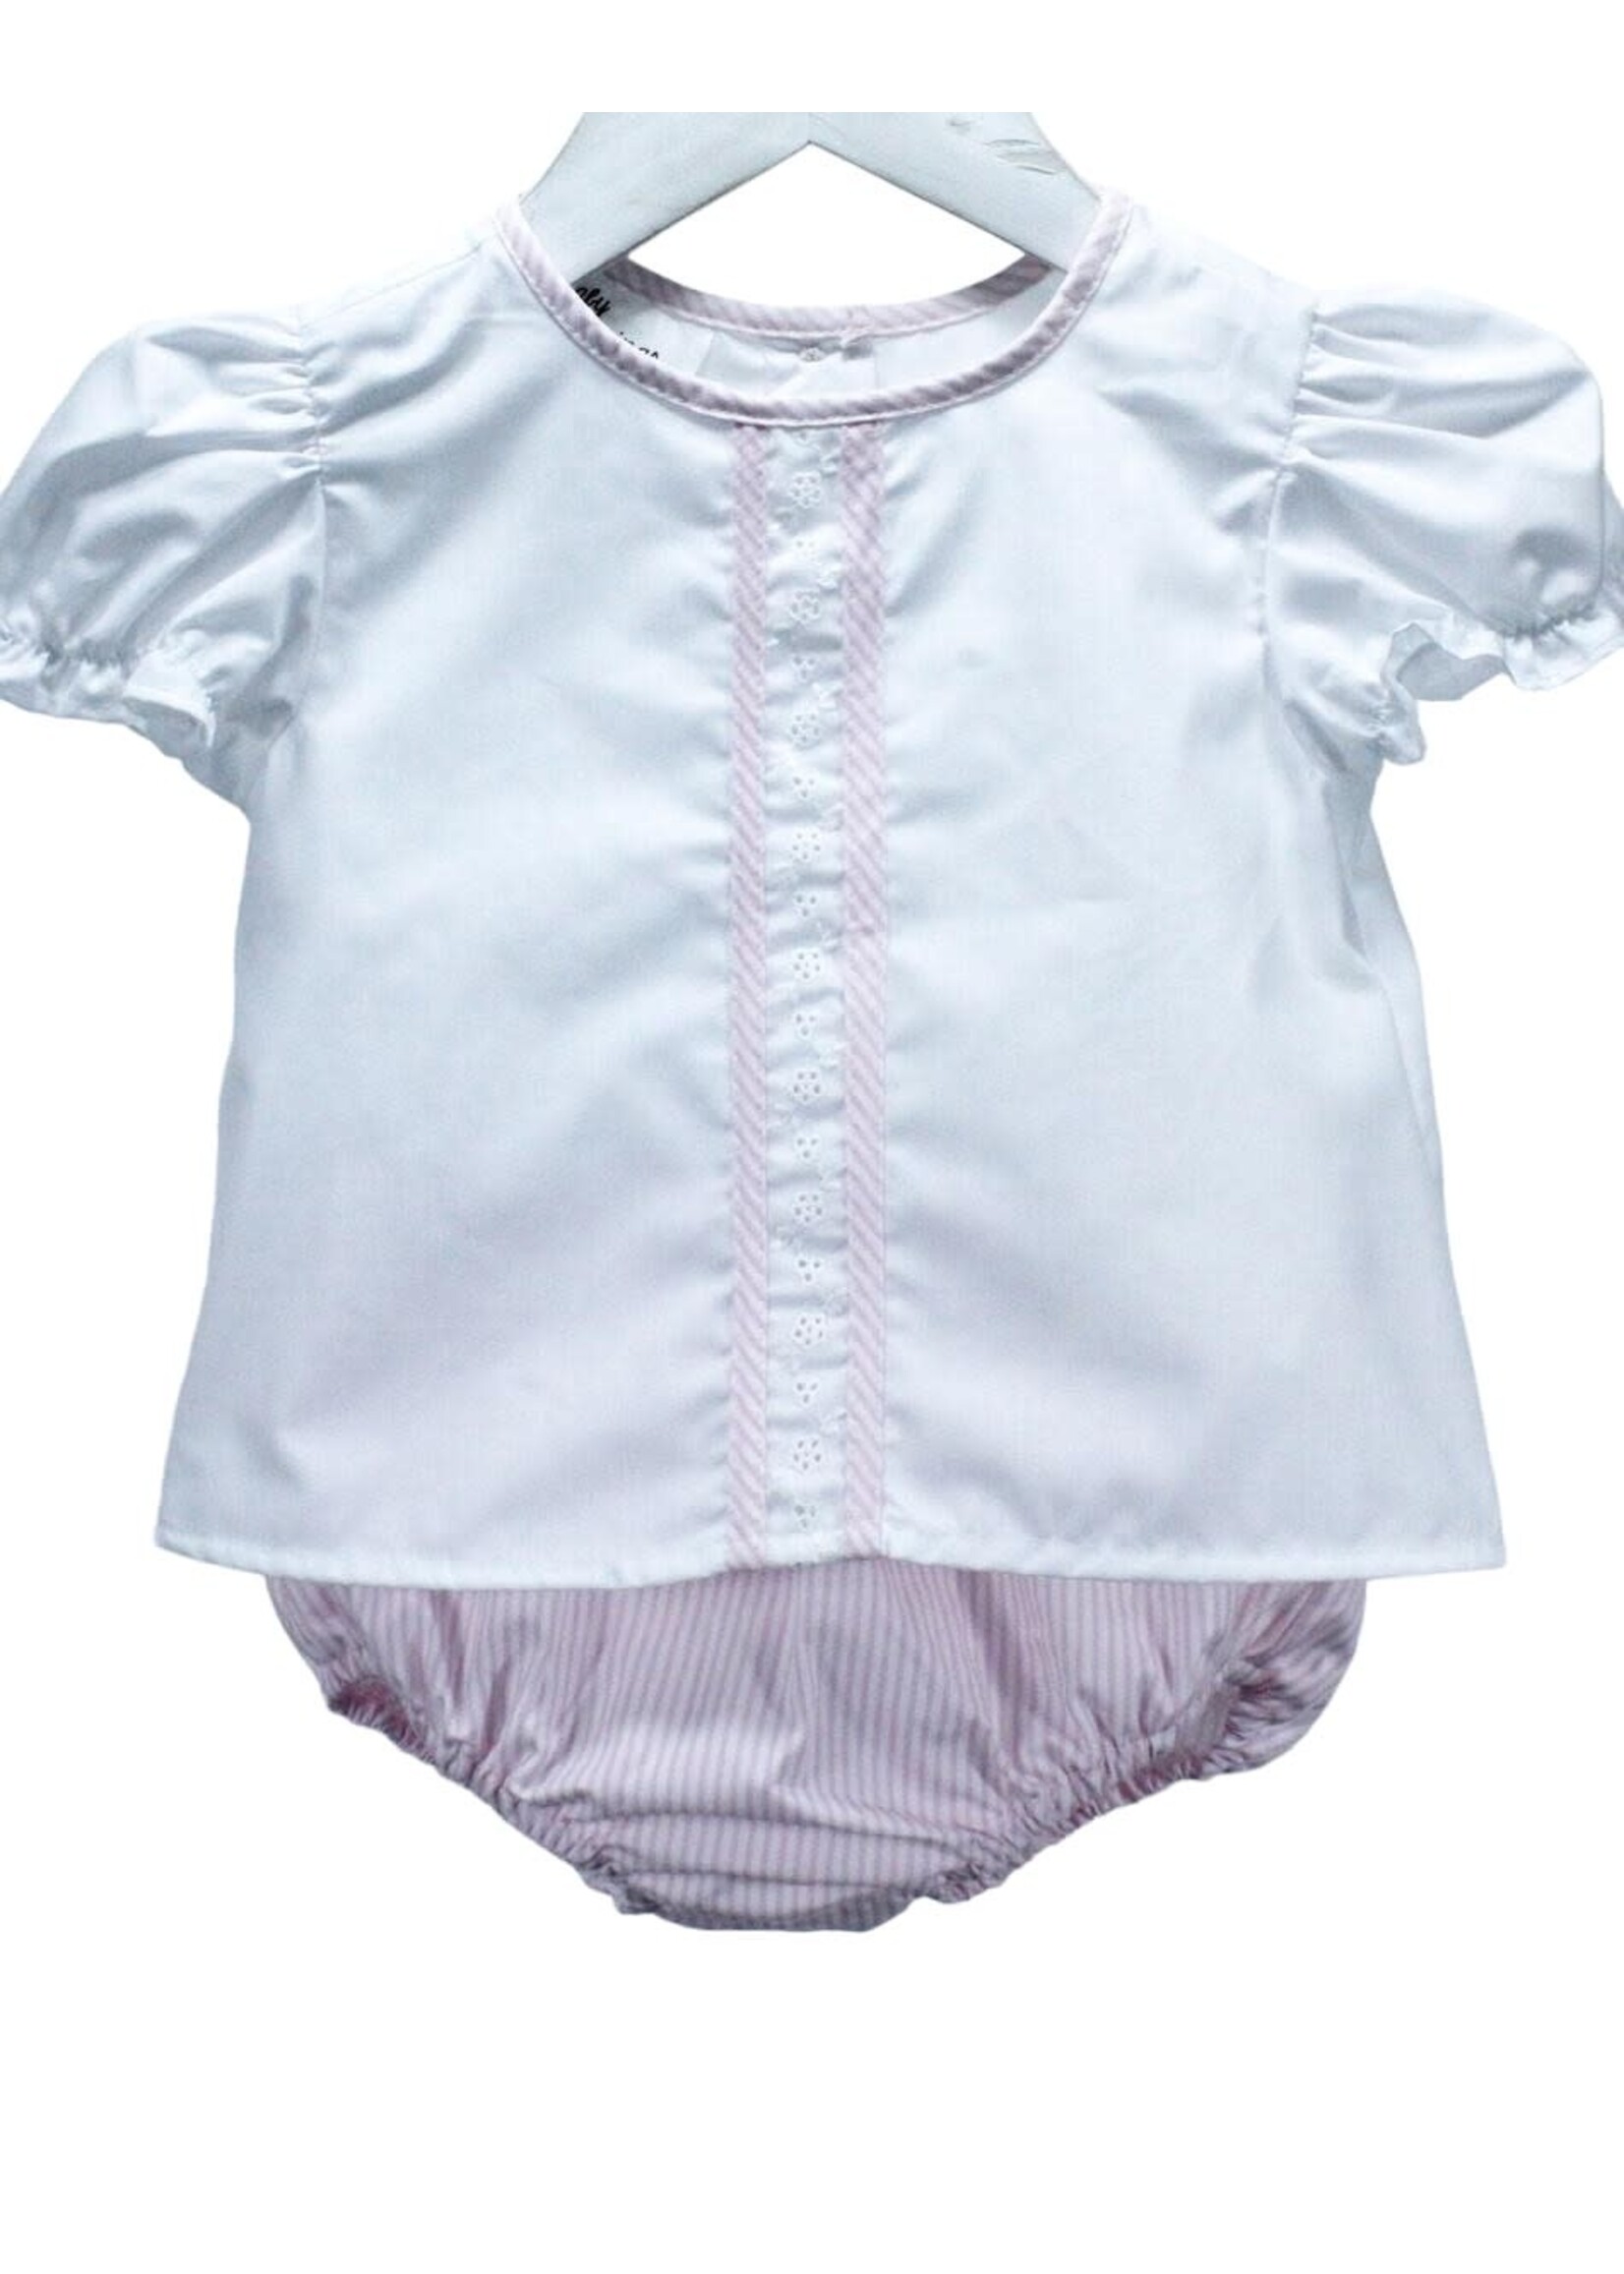 Baby Blessings Pink & White Stripe Ruby Set